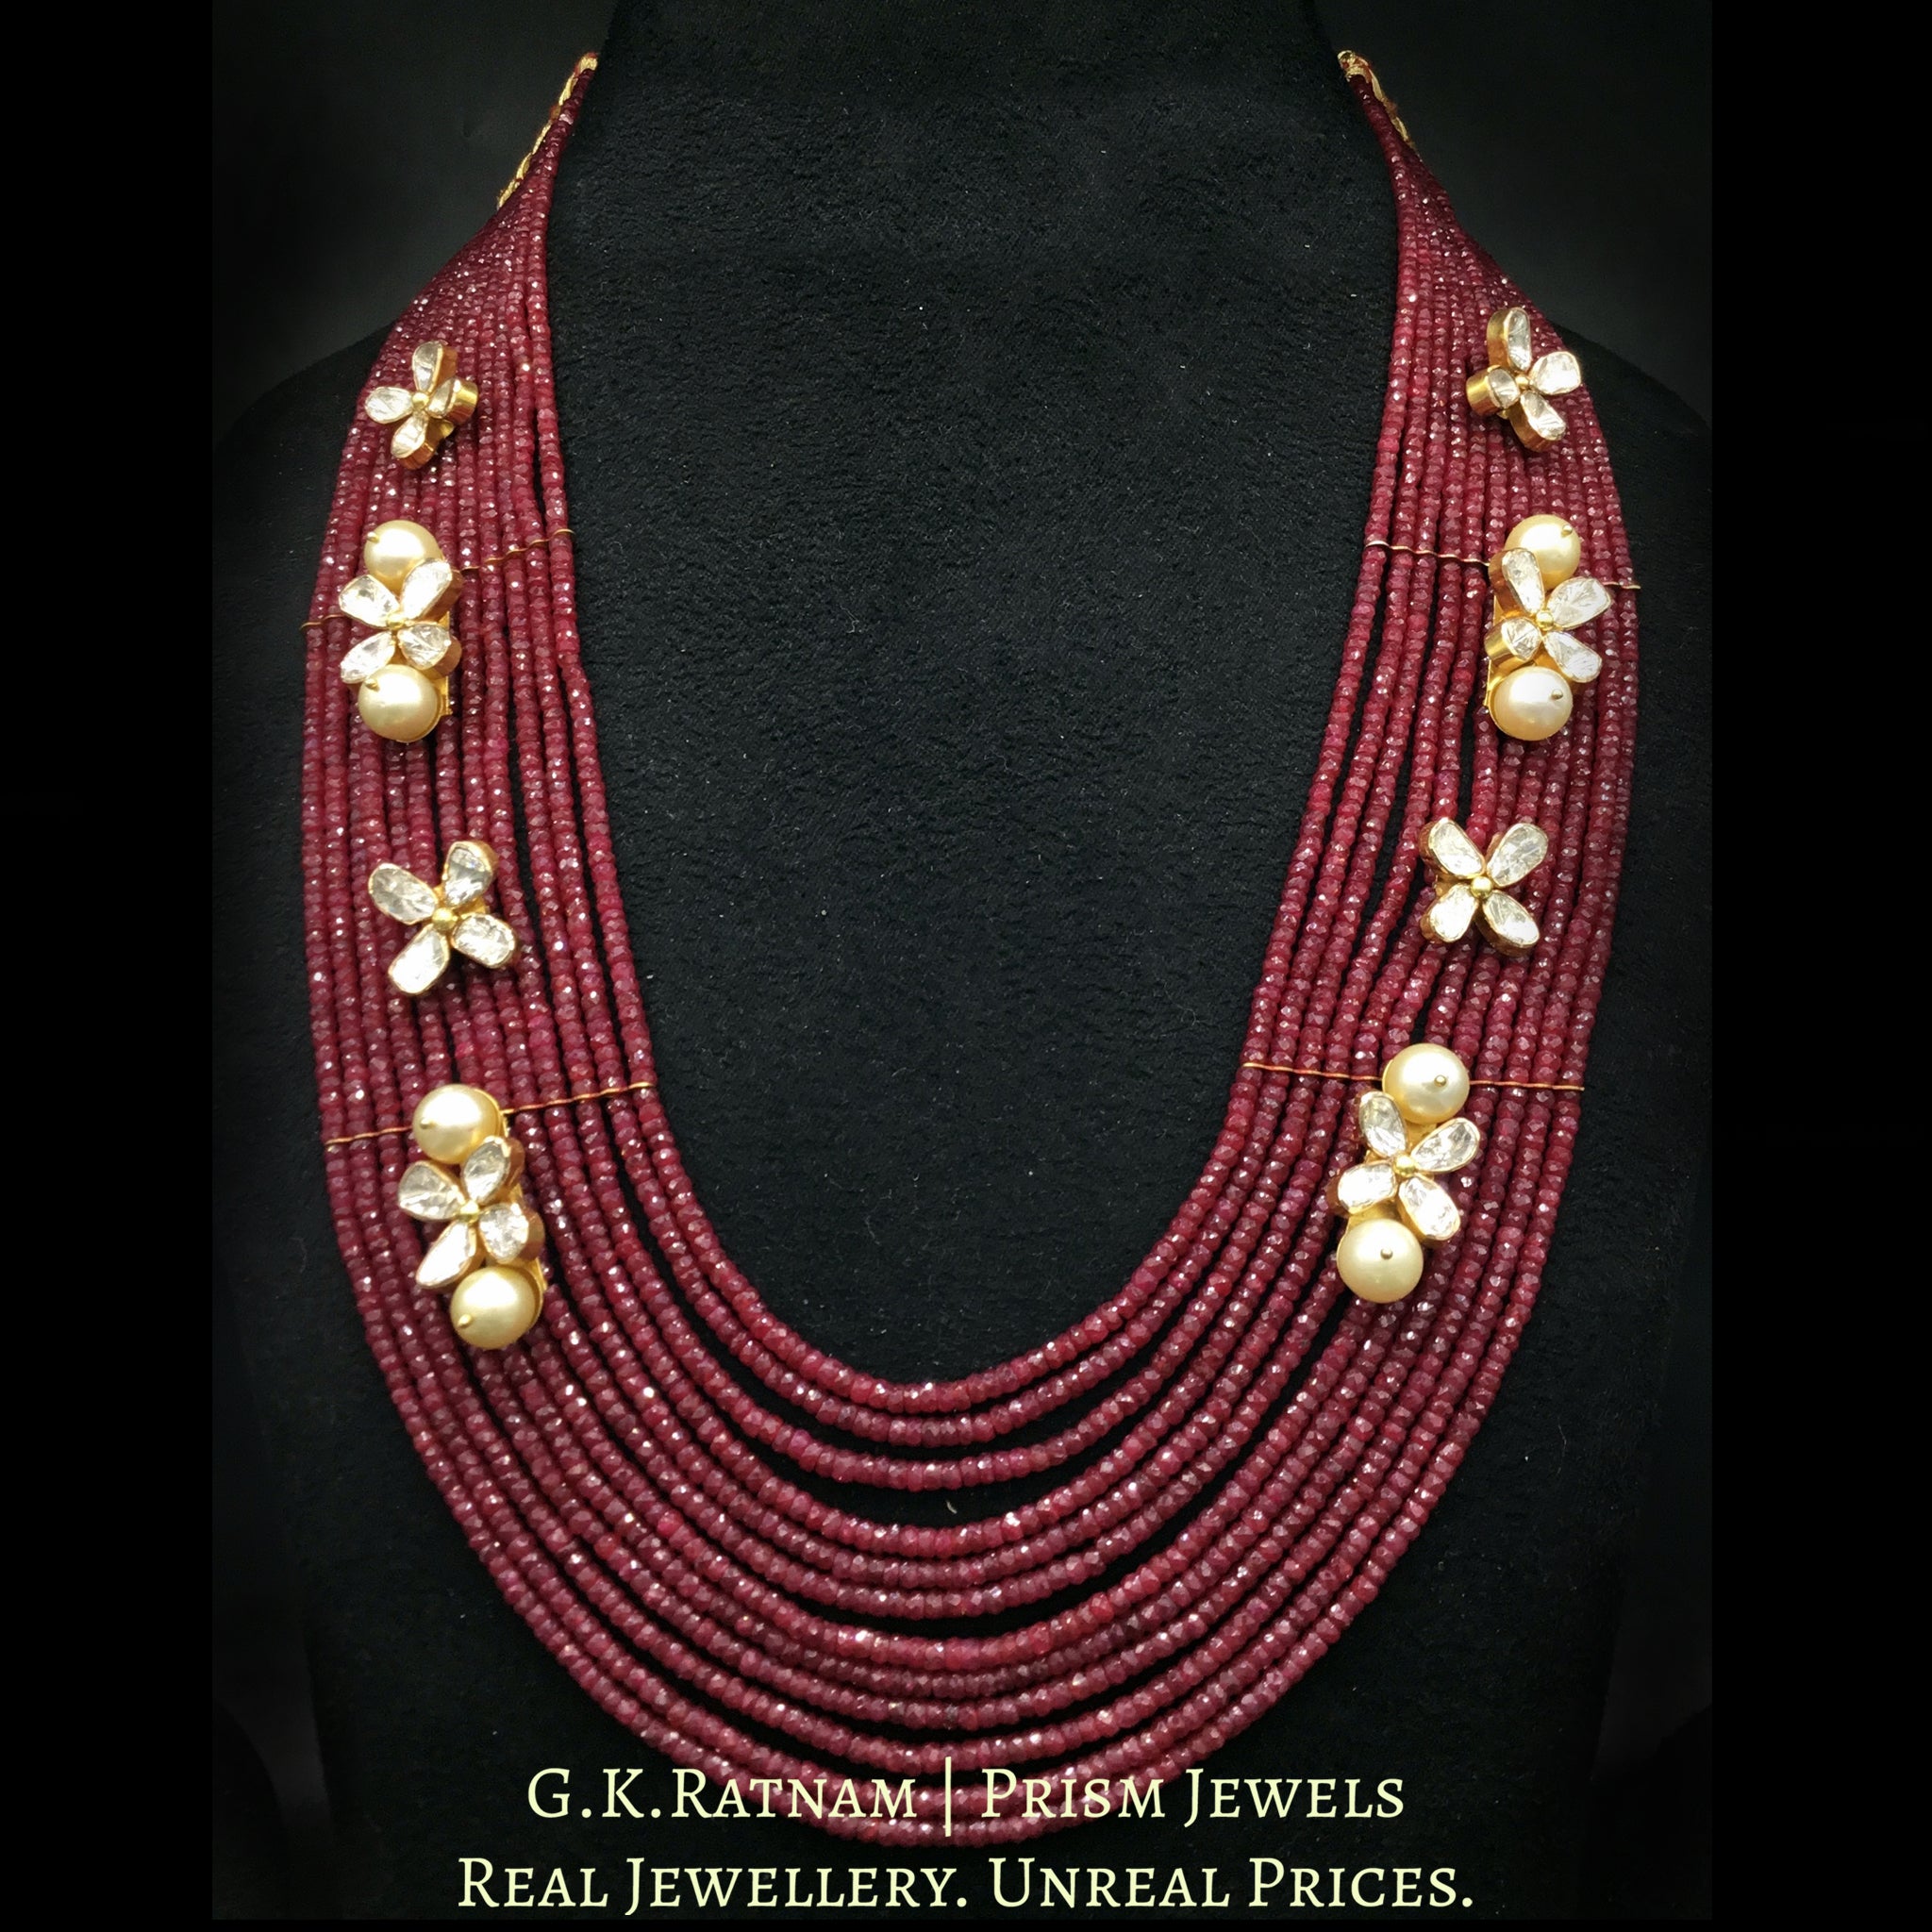 18k Gold and Diamond Polki Open Setting Broach Necklace with flowery pieces strung in ruby cut beads